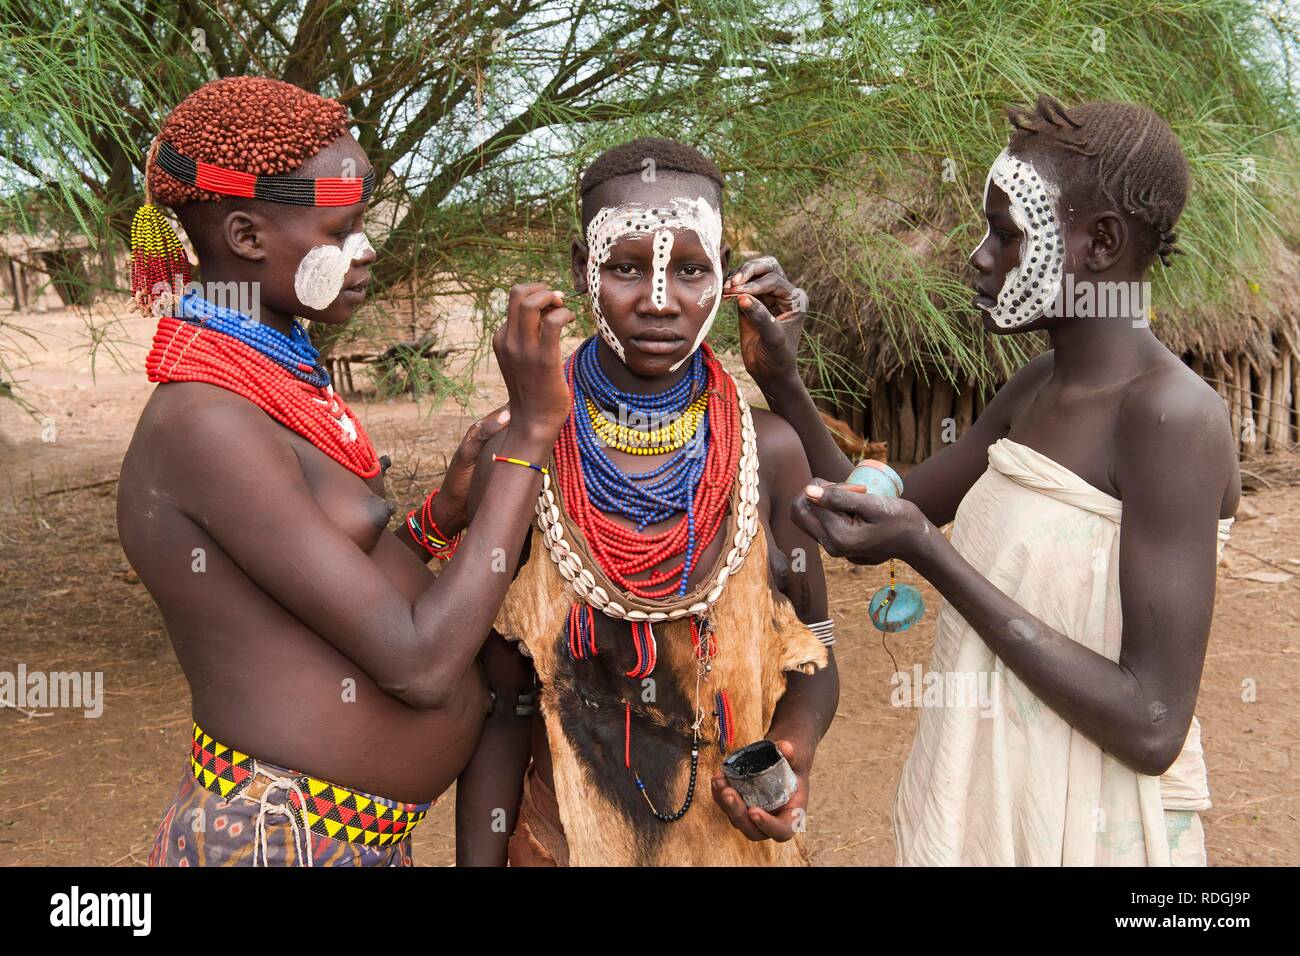 Three young Karo women putting on make-up, facial paintings, Omo river valley, Southern Ethiopia, Africa Stock Photo